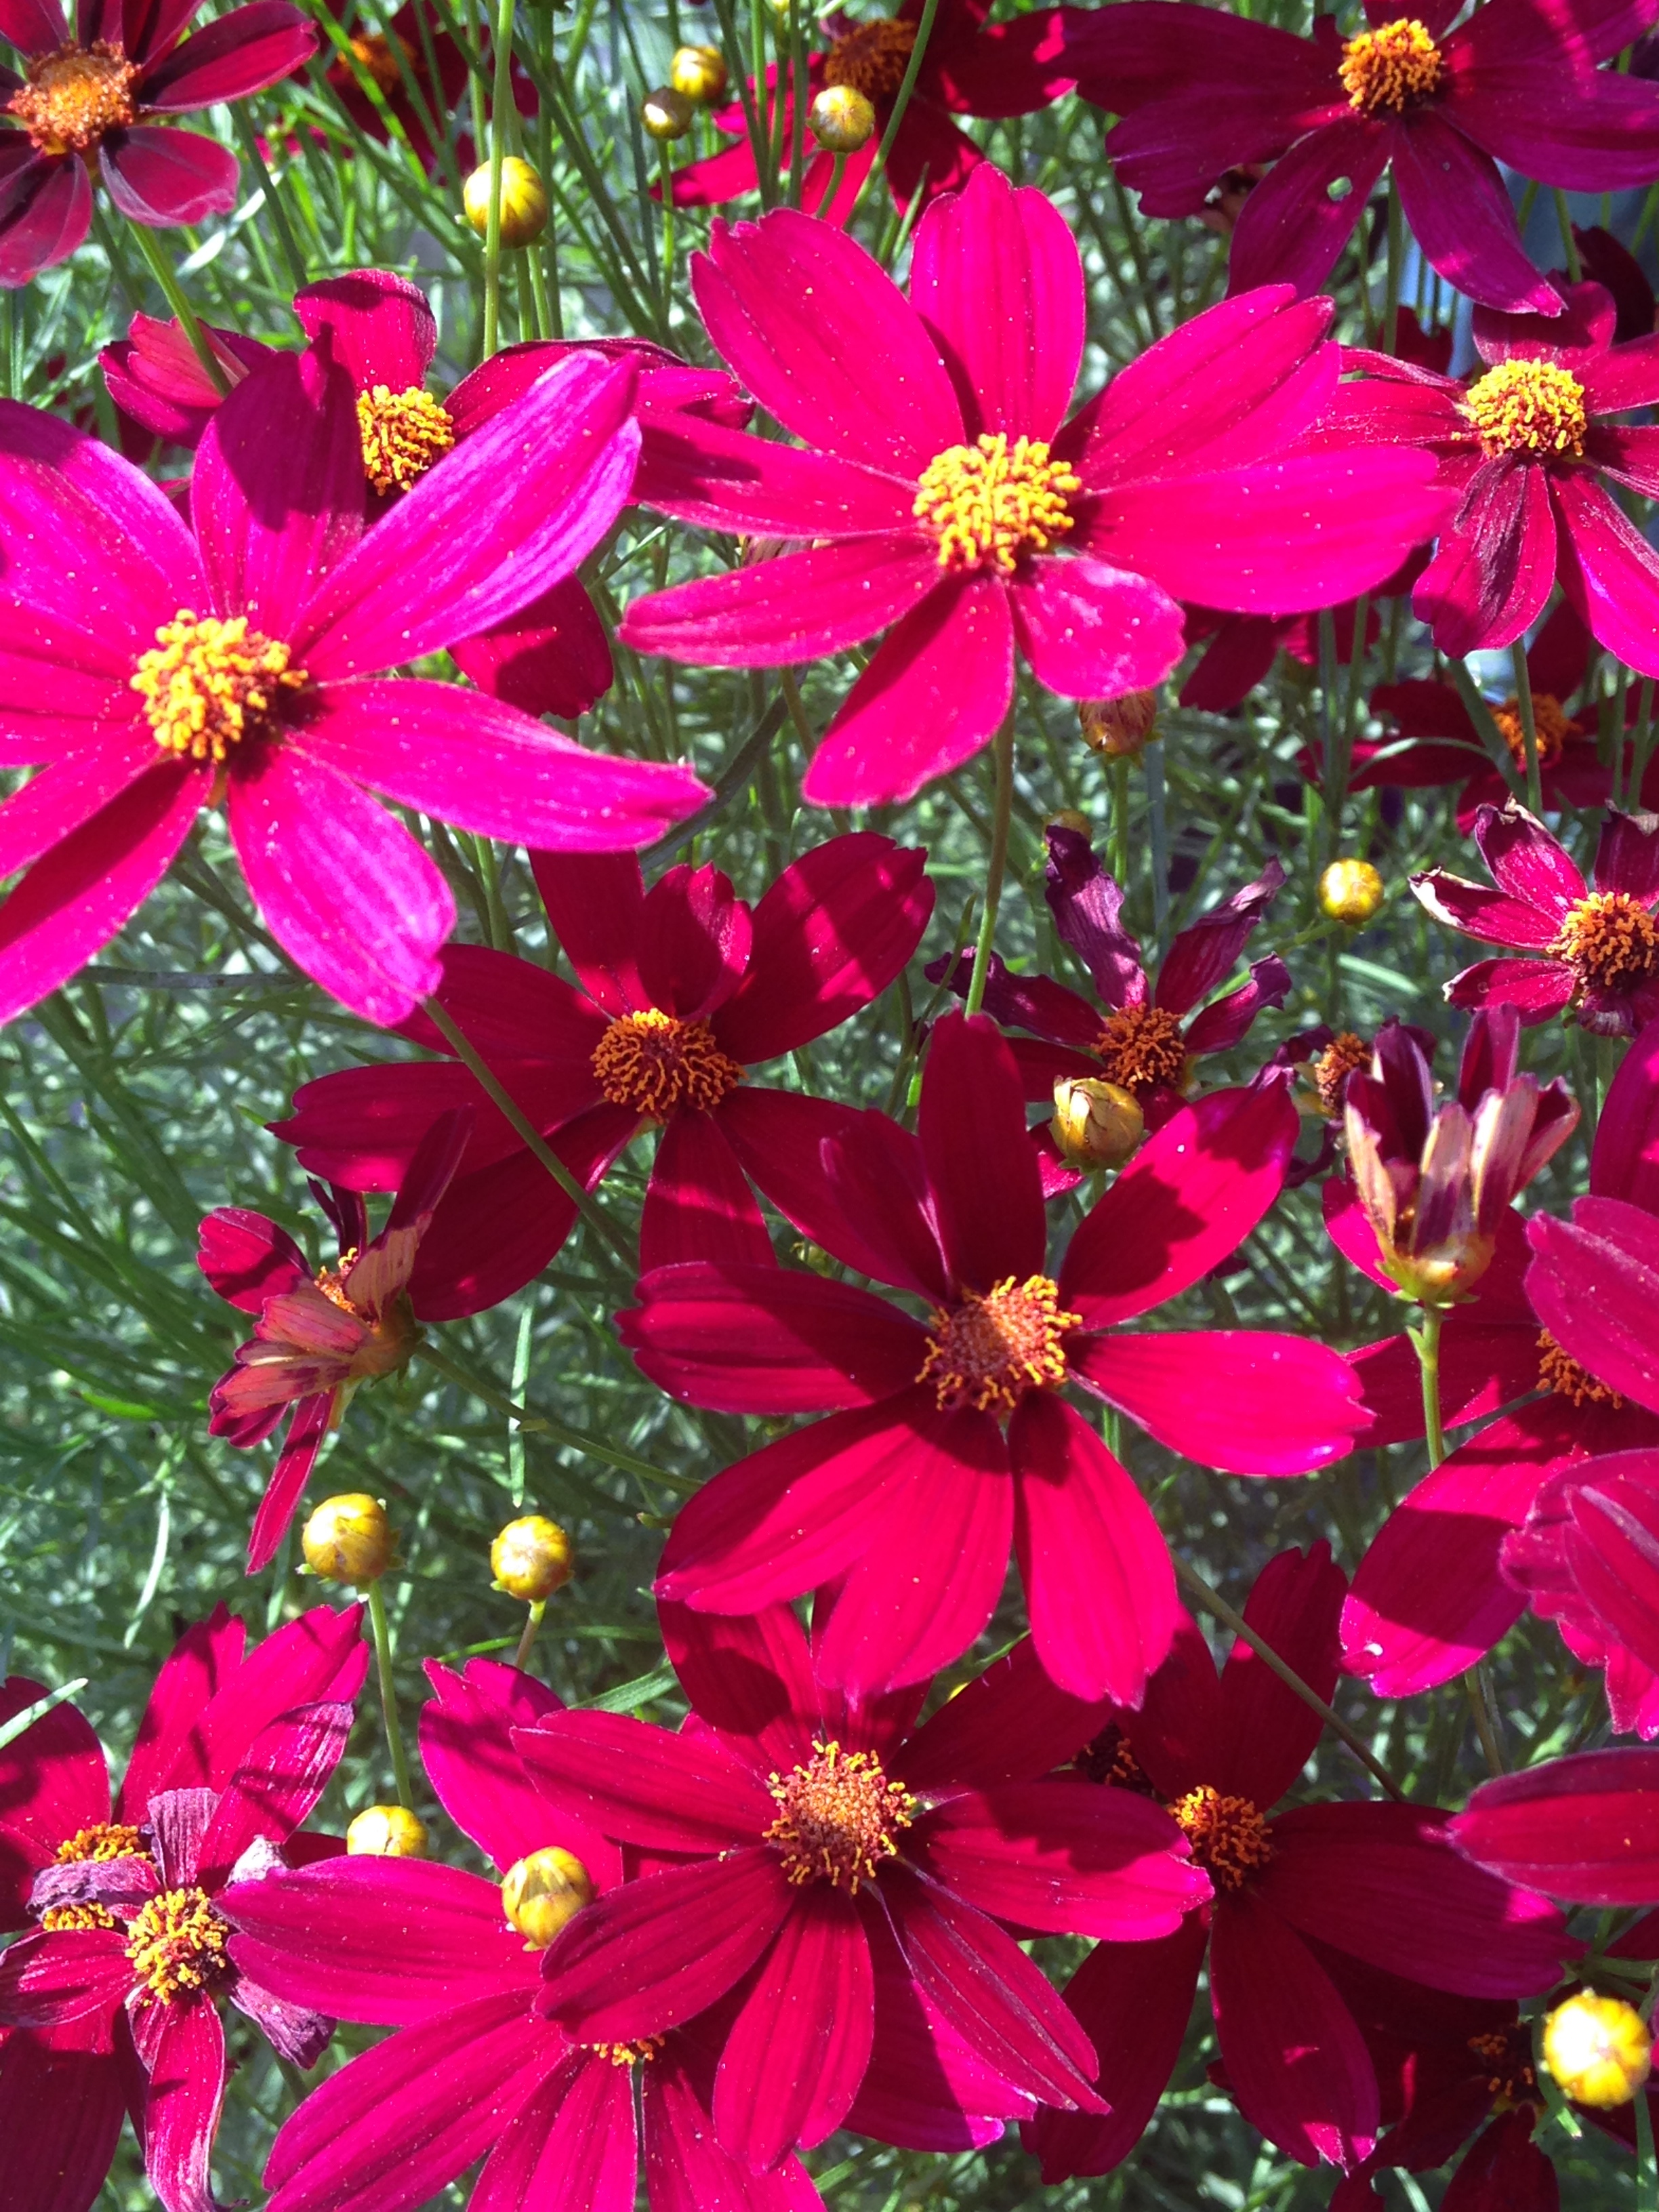 Coreopsis 'Red Satin' a great summer bloomer that blooms until fall.